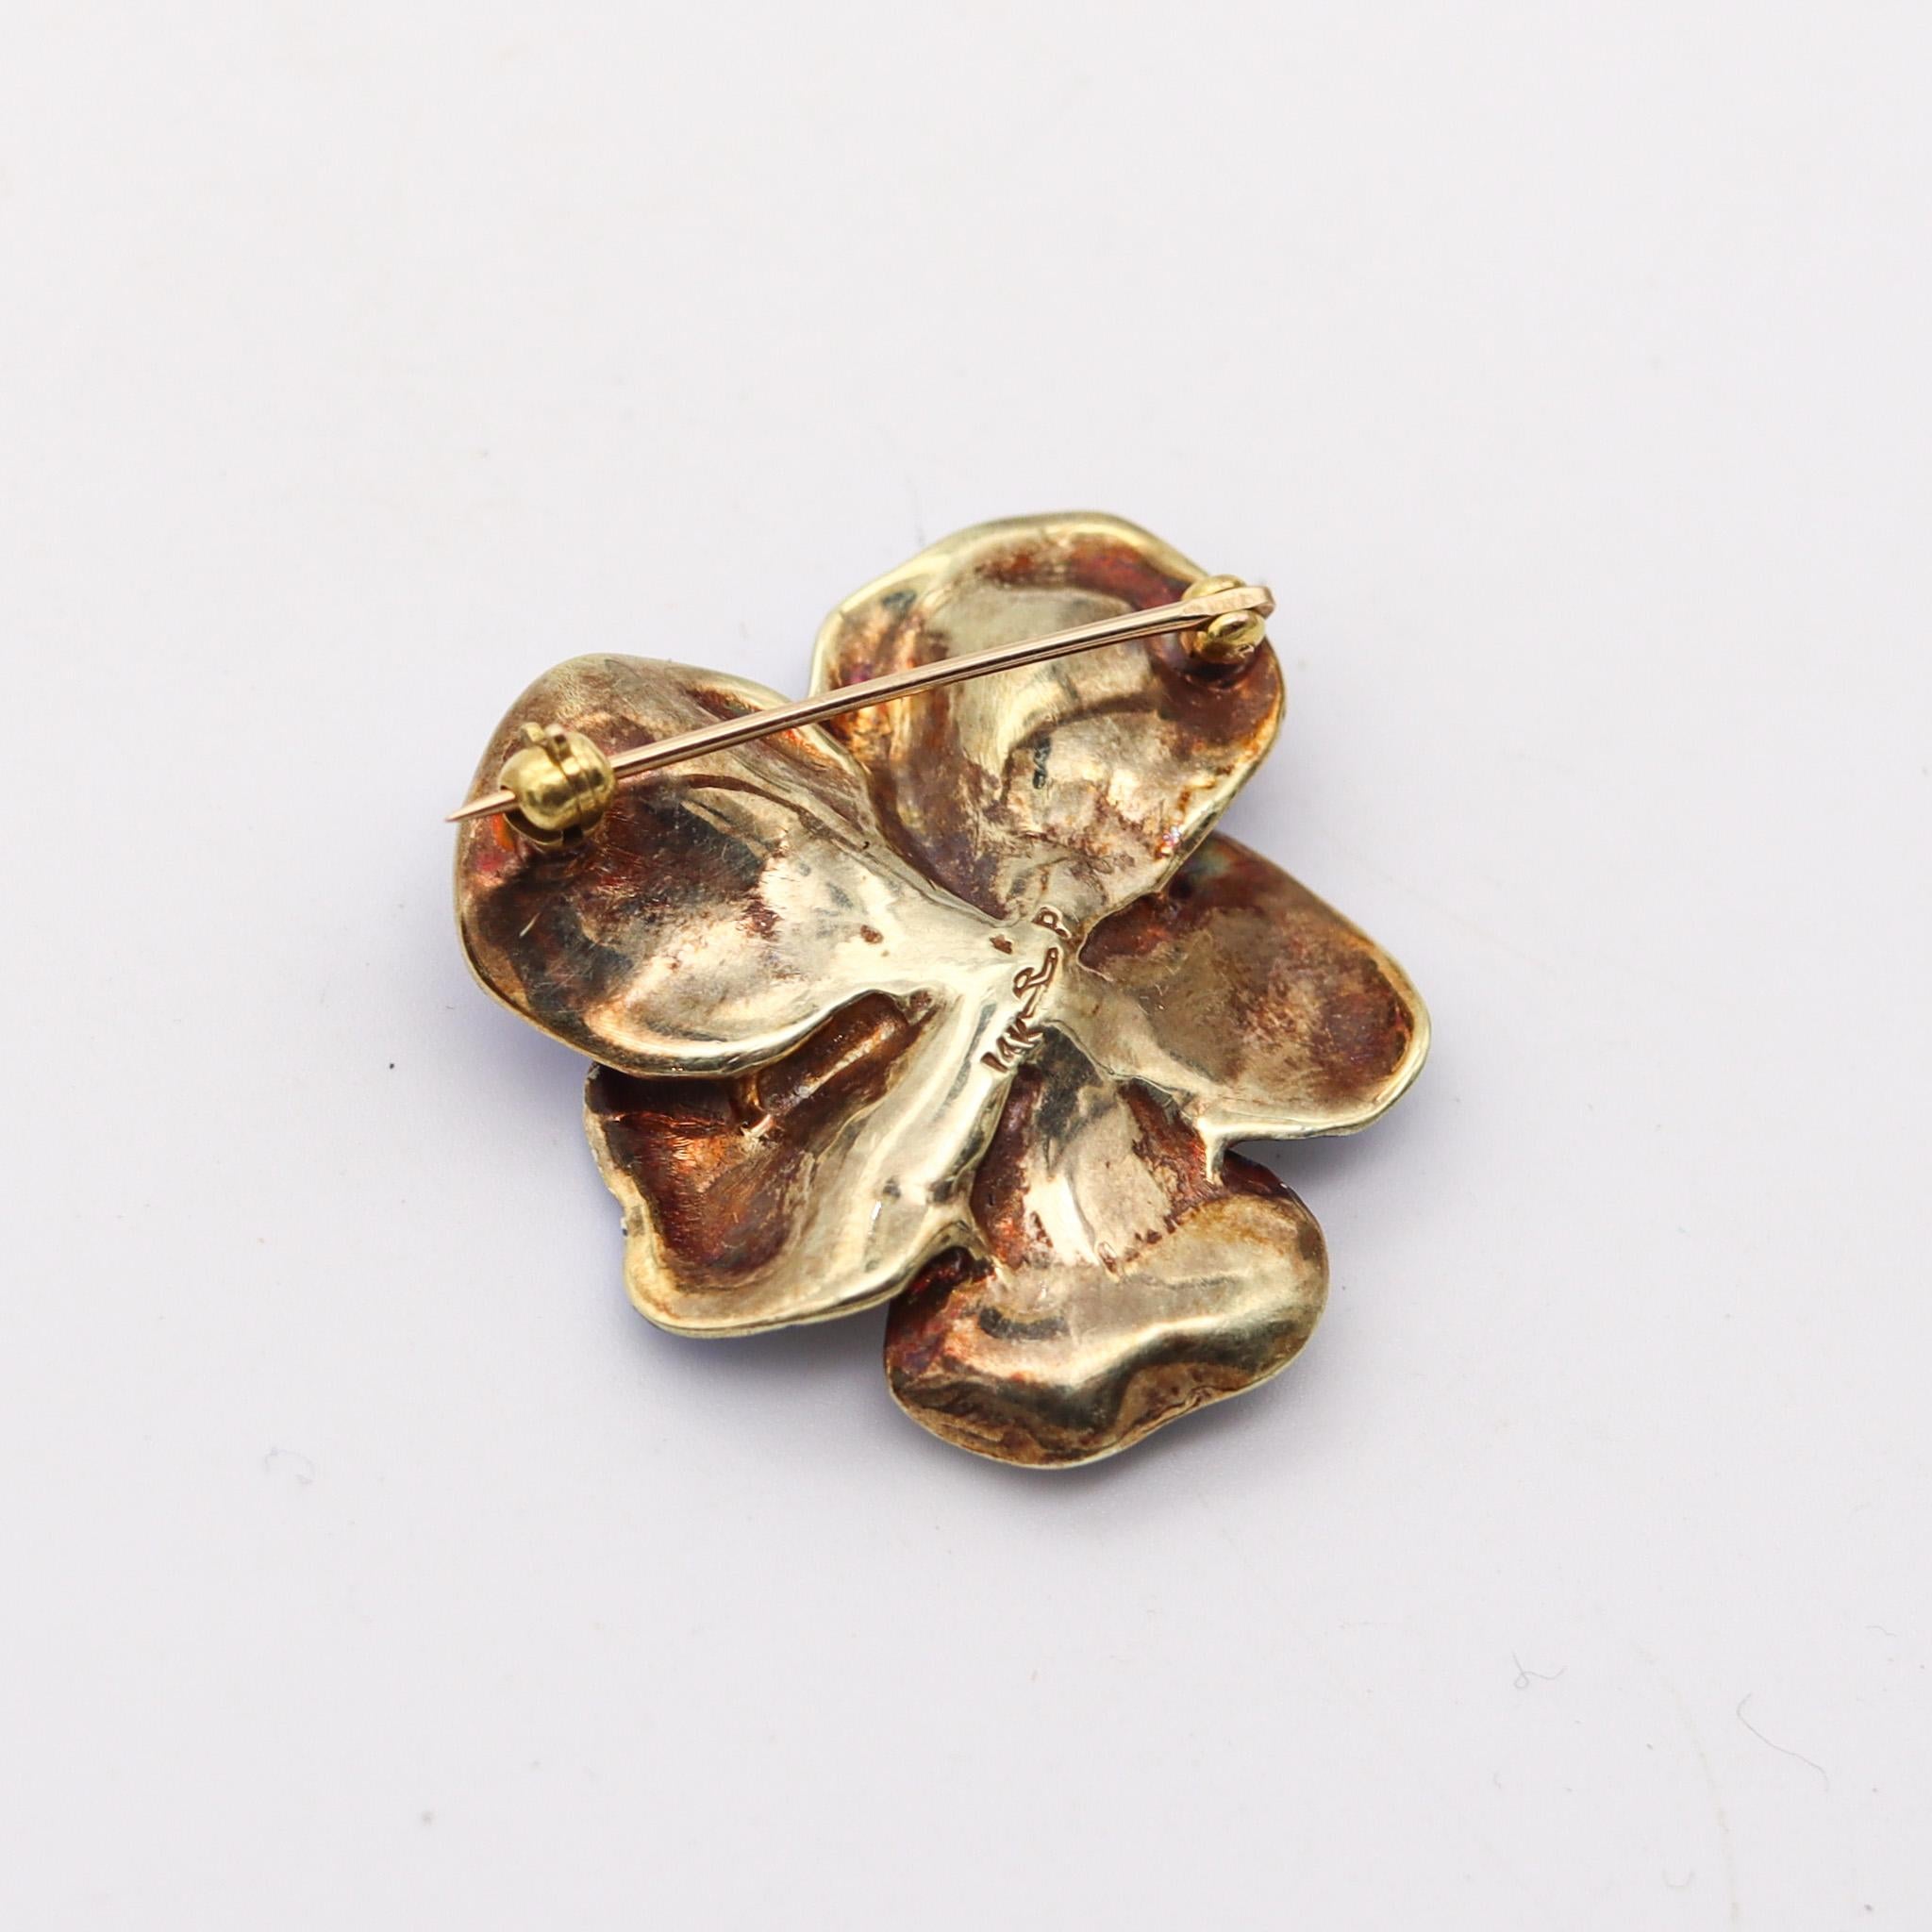 Larter & Sons 1900 Art Nouveau Enameled Pansy Flower Brooch In 14Kt Yellow Gold In Excellent Condition For Sale In Miami, FL